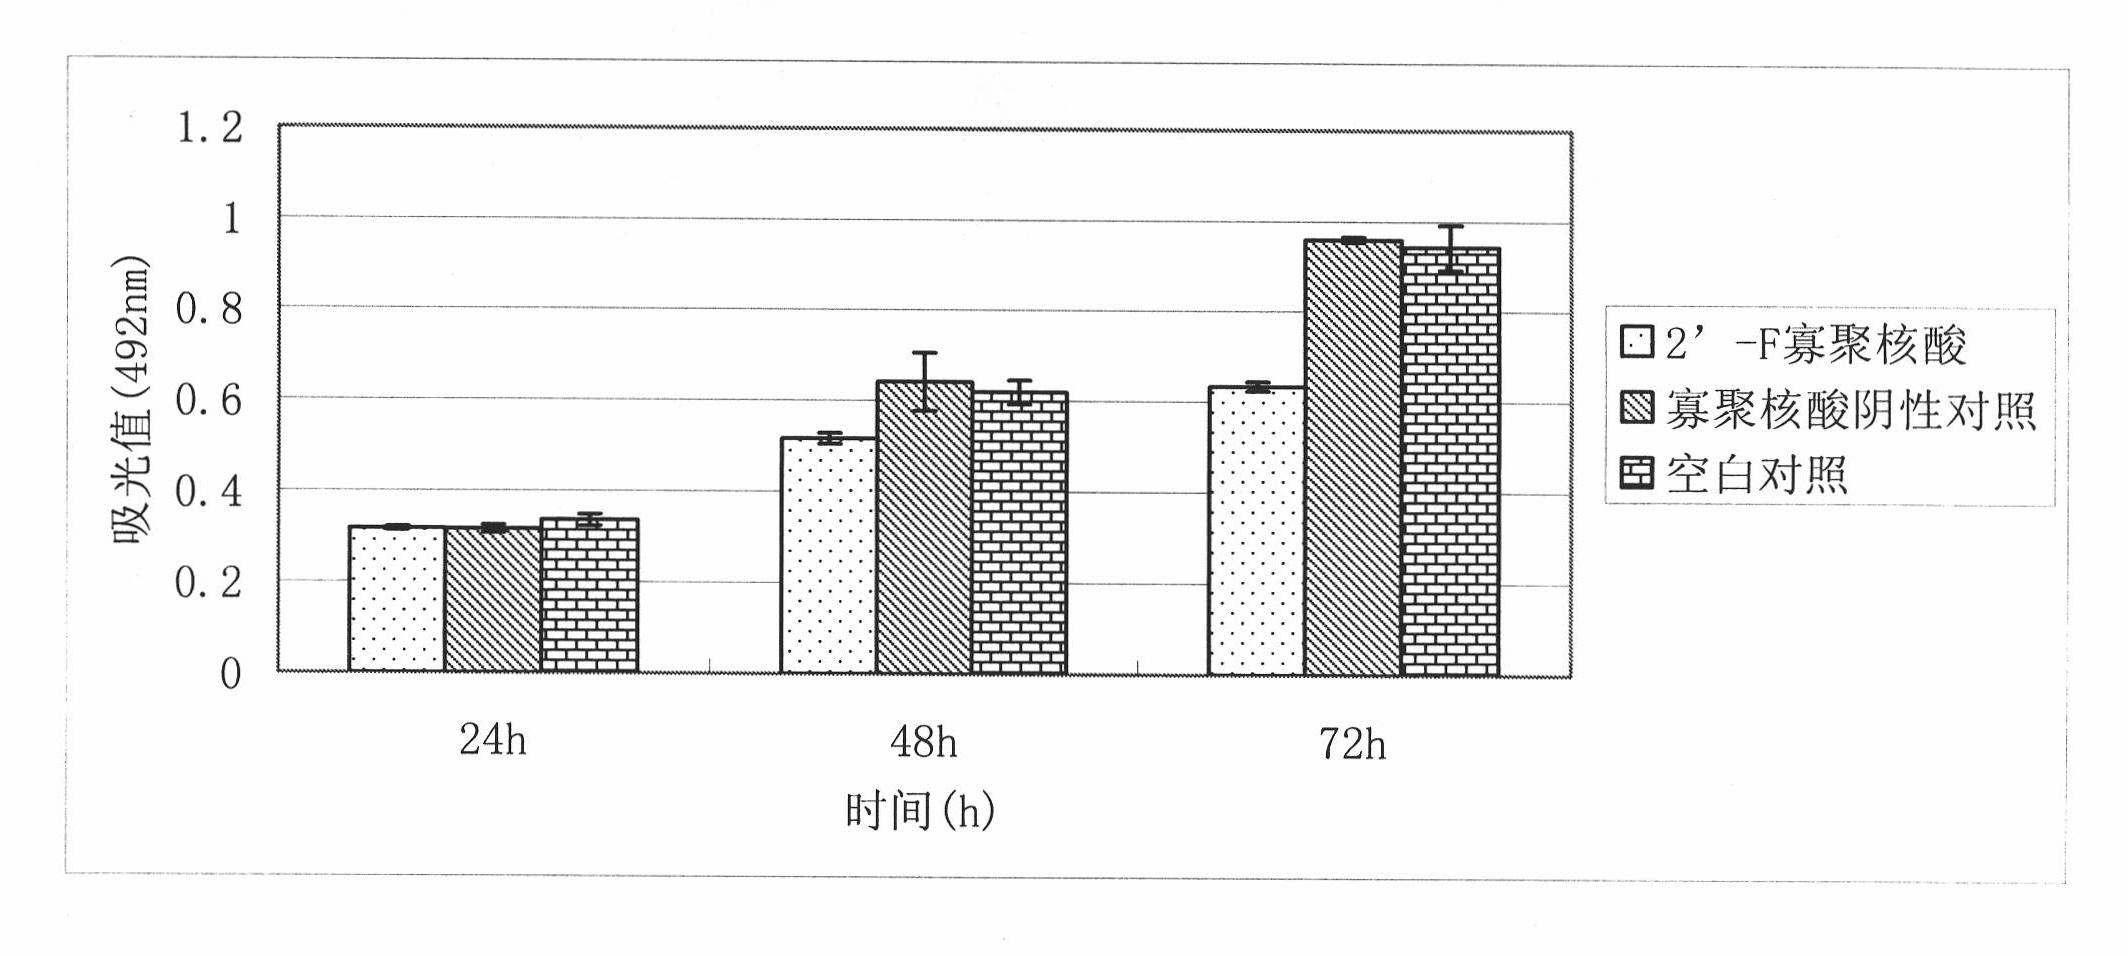 Oligodeoxyribonudeotide for preventing recurrence of tumor and inhibiting tumor growth as well as application thereof